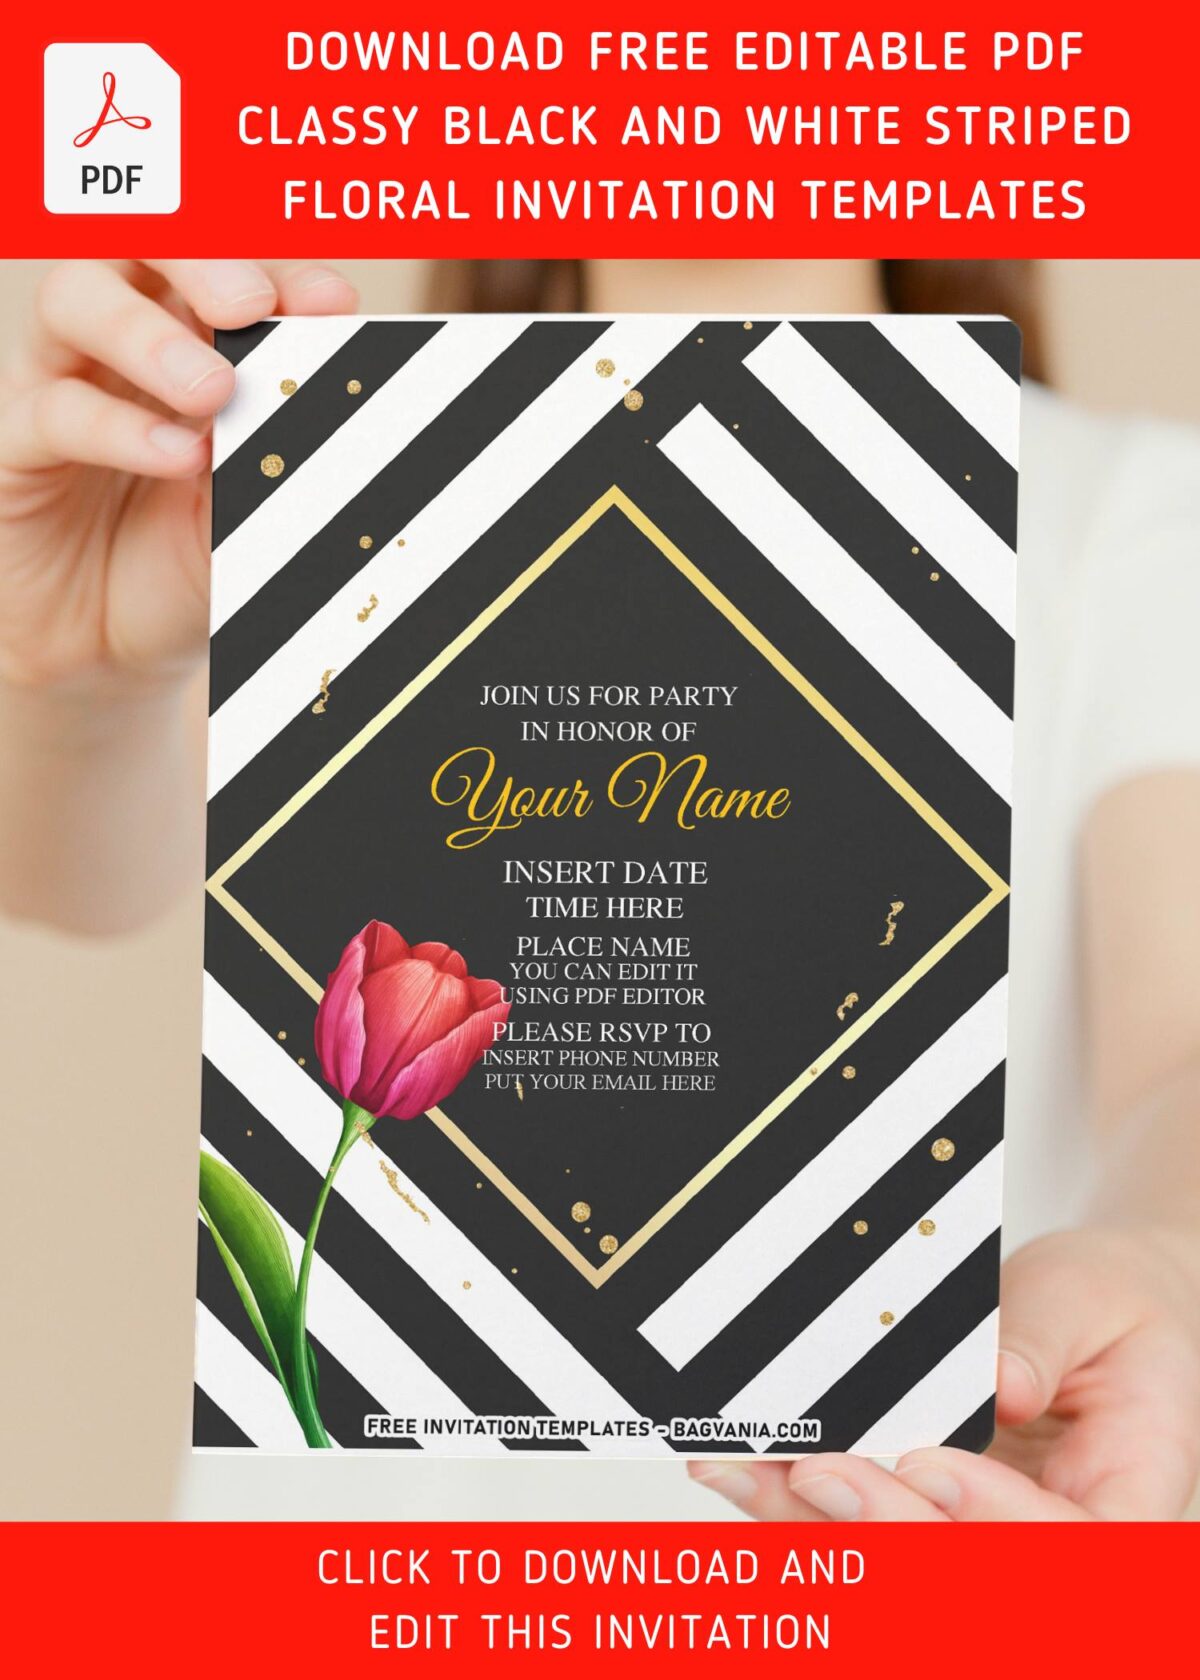 (Free Editable PDF) Classic Palette Black And White Floral Invitation Templates with editable text